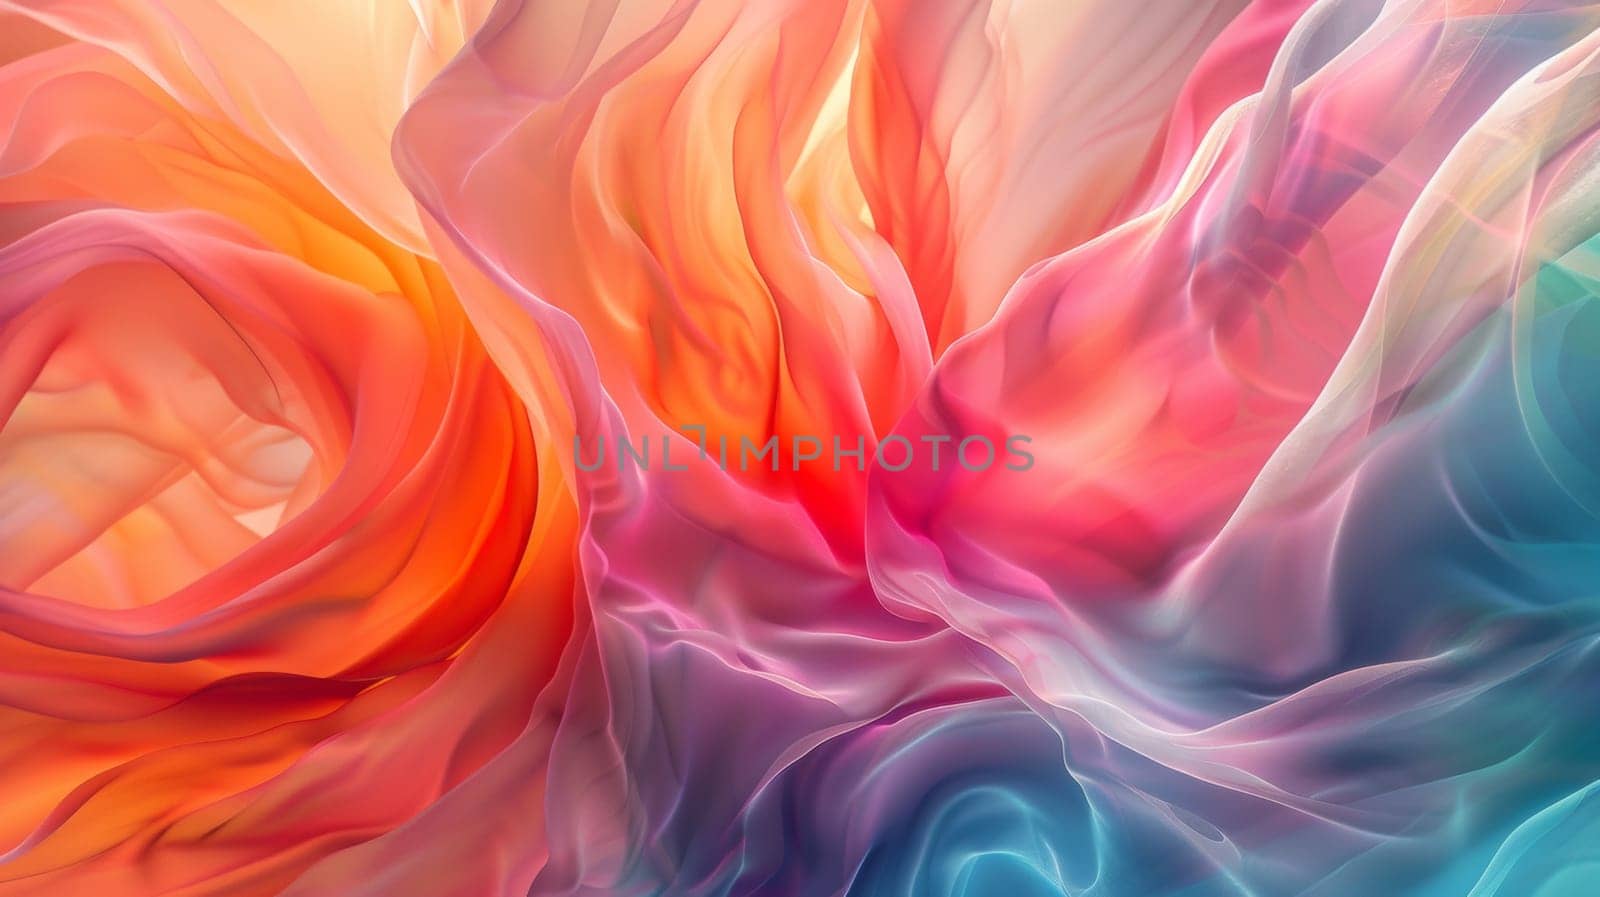 A close up of a colorful abstract painting with swirls and waves, AI by starush